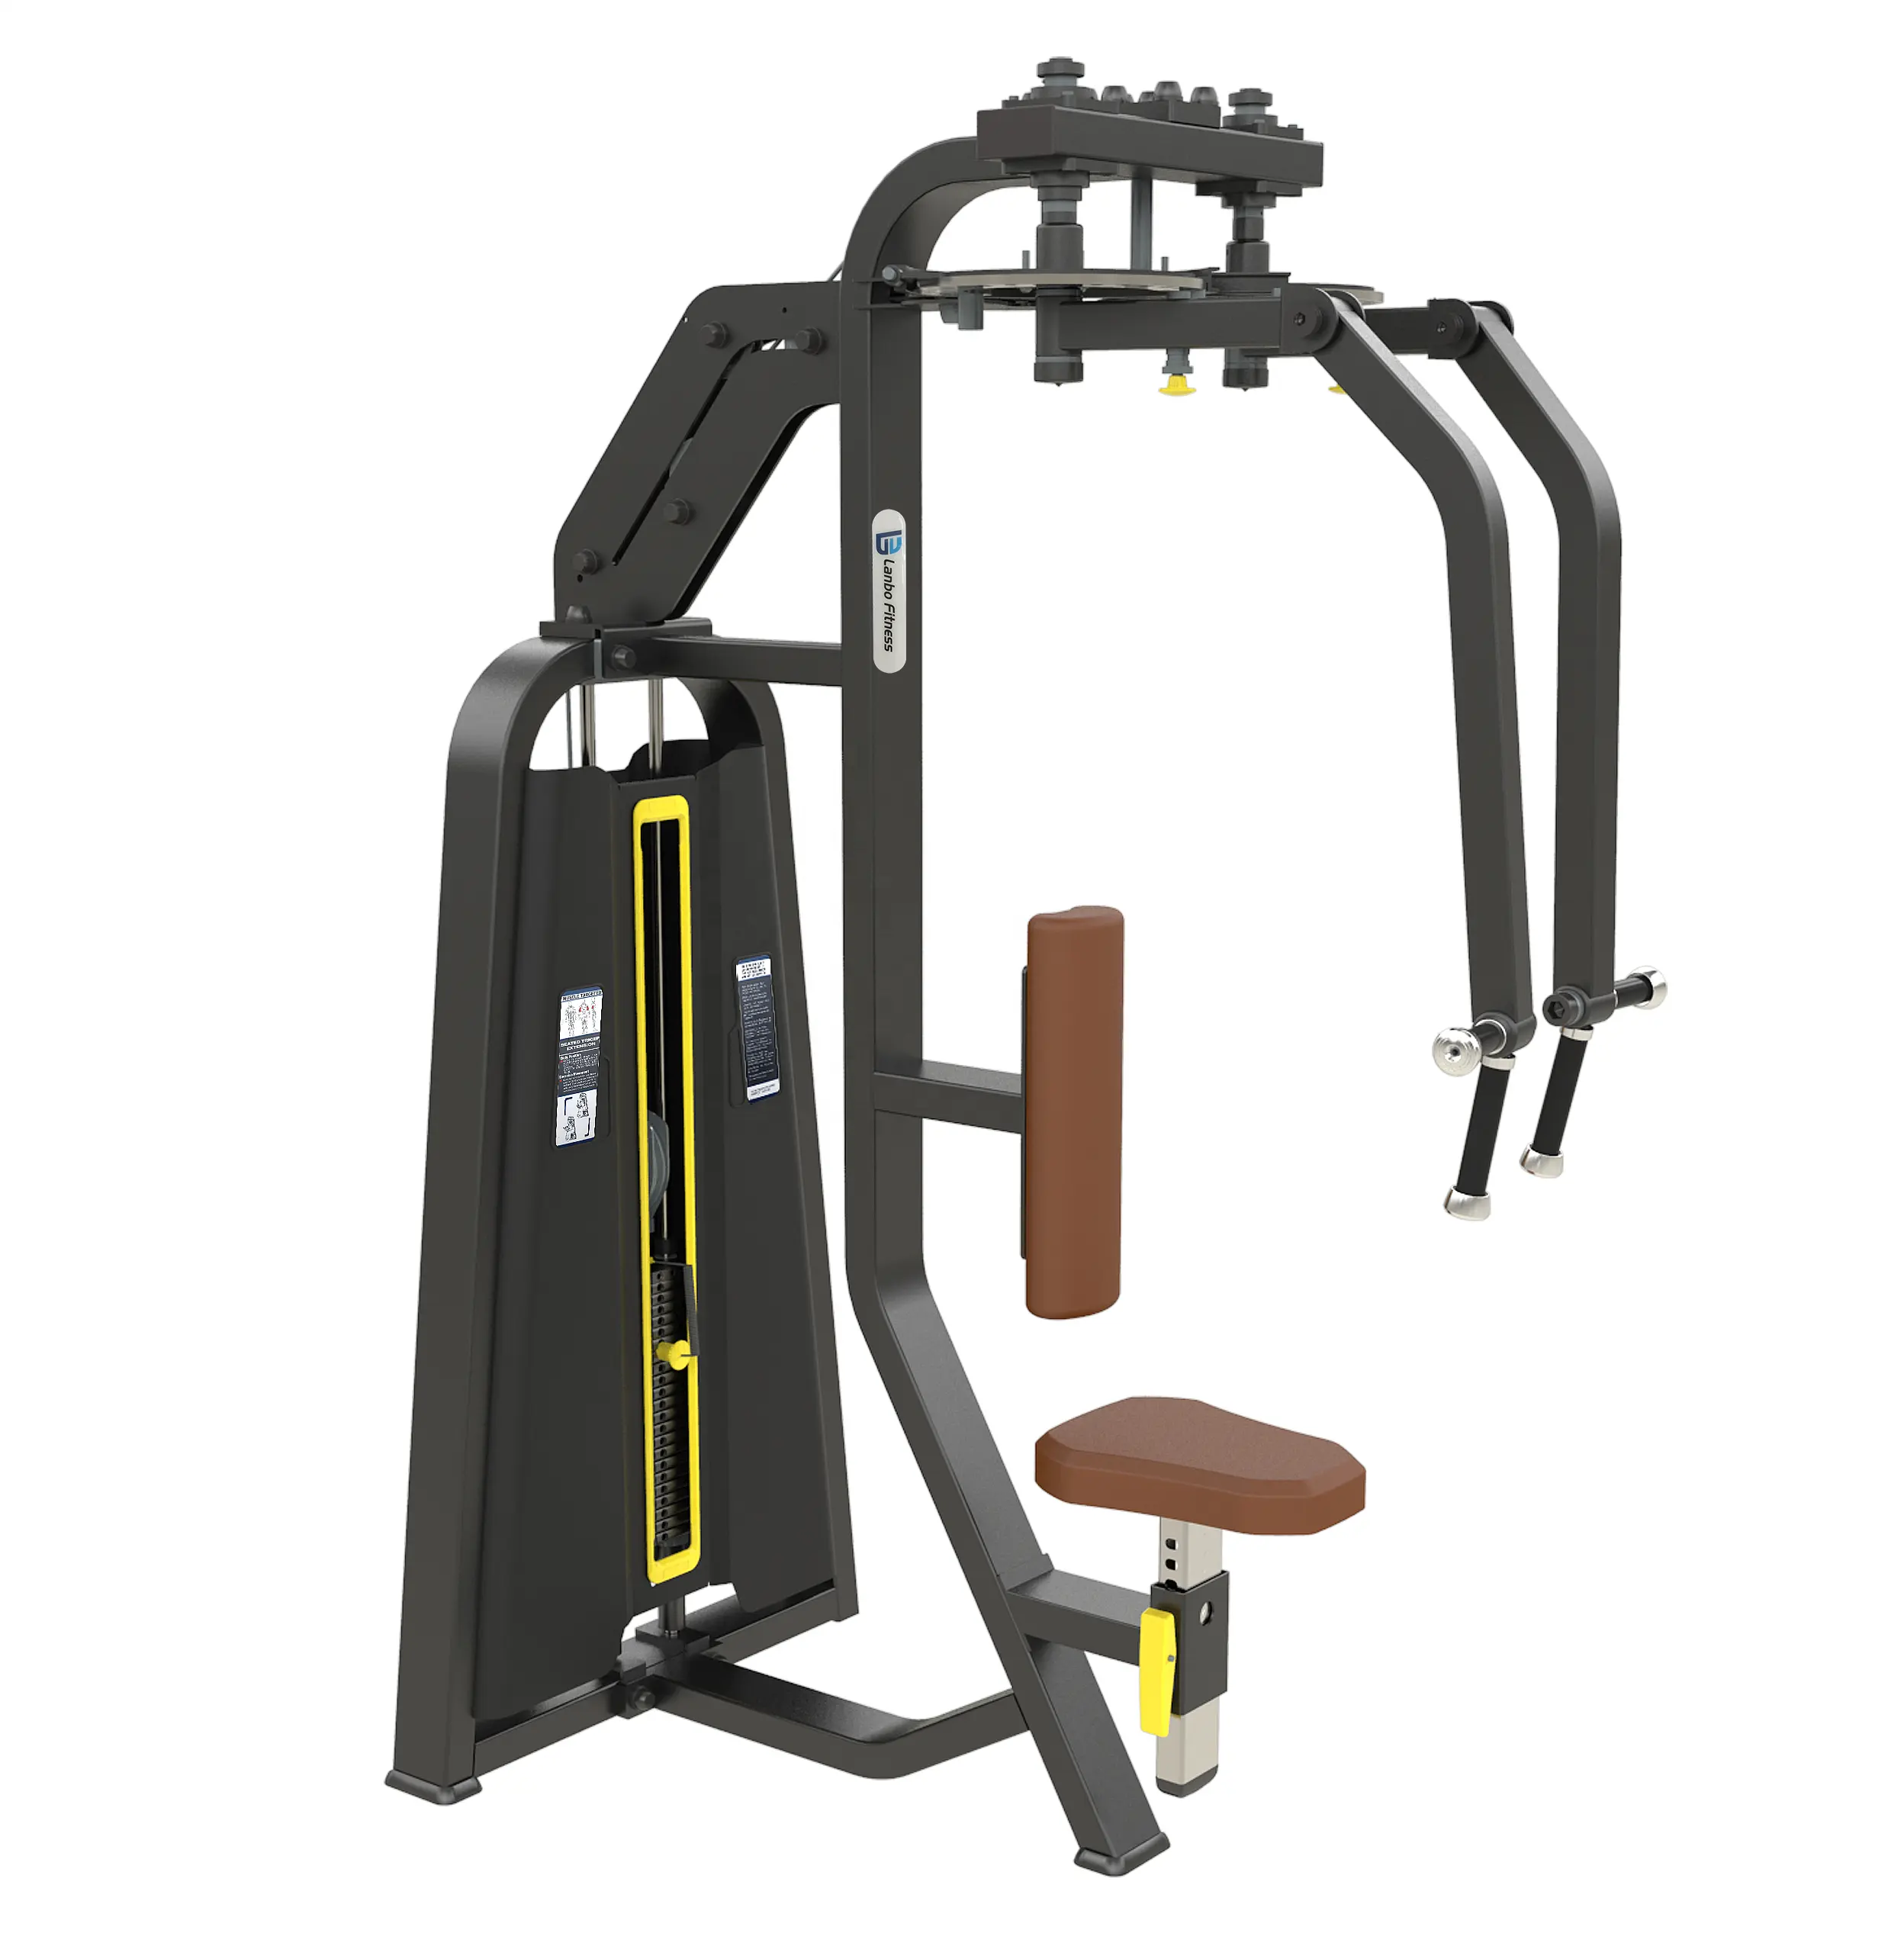 Shandong Lanbo gym equipment commercial rear delt pec fly body building machine New strength gym exercise fitness equipment